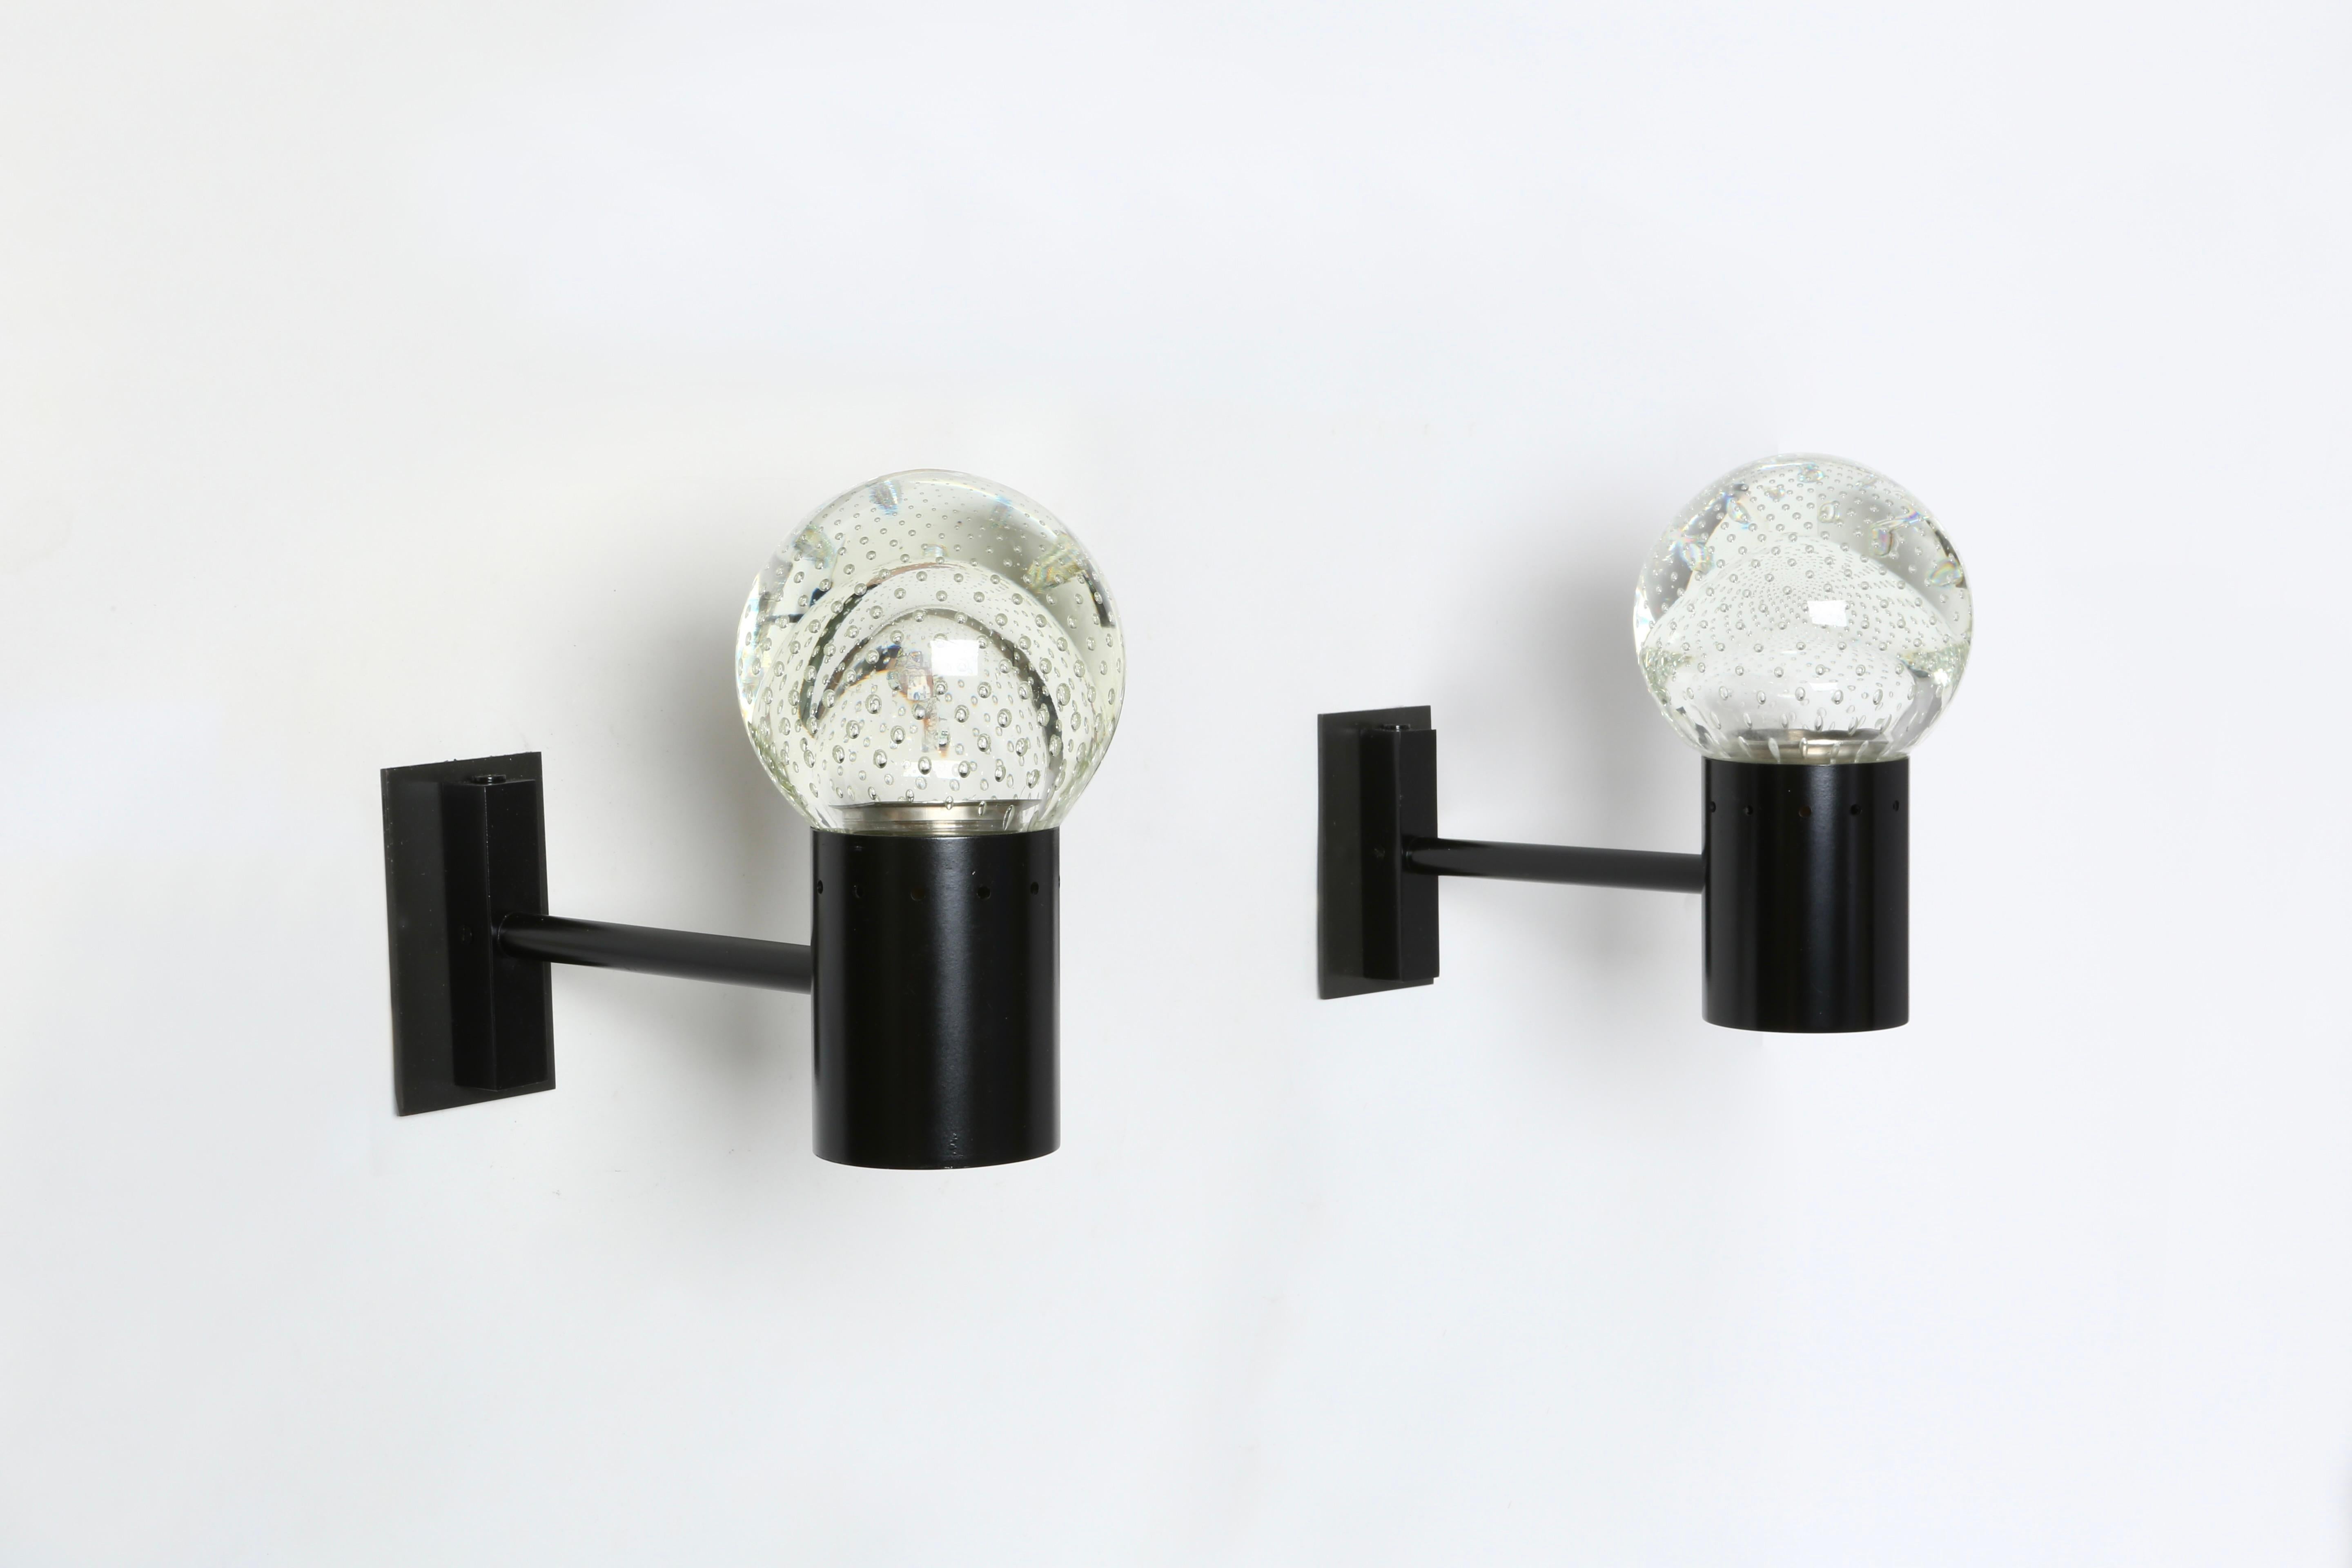 Gino Sarfatti sconces for Seguso, a pair
Designed and manufactured in Italy in 1950s
Seguso bullicante glass and enameled metal frames.
Rewired for US with custom back plates in patinated brass.
Refinished, re-enameled.

We take pride in bringing